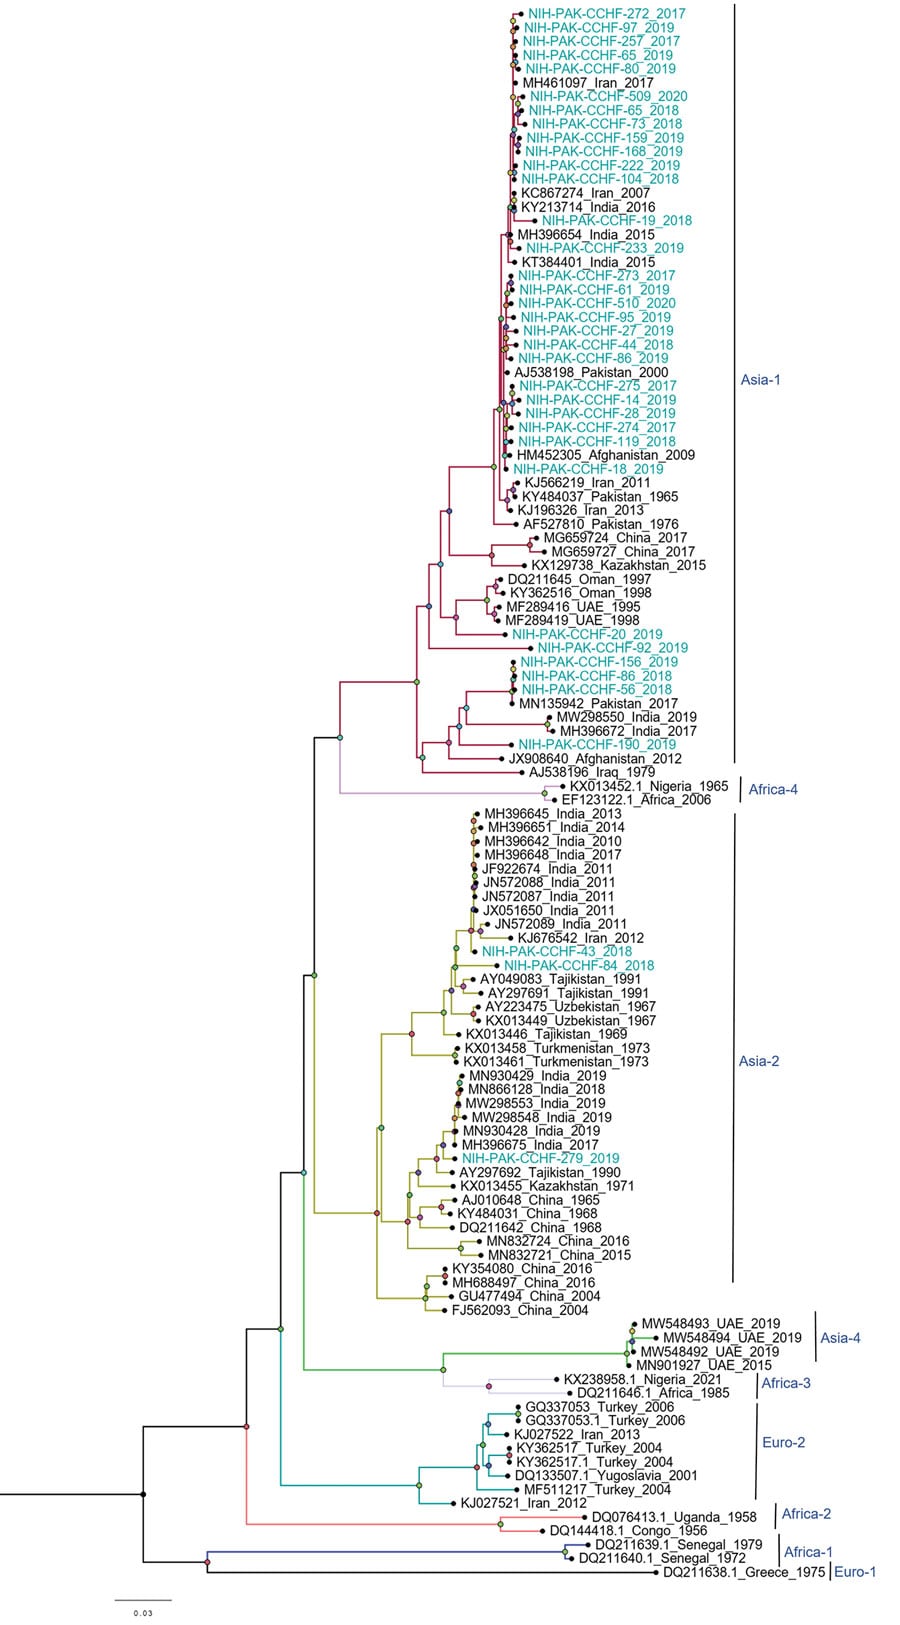 Phylogenetic analysis of full-length small gene segments of Crimean-Congo hemorrhagic fever virus in study of virus diversity and reassortment, Pakistan, 2017–2020. Midpoint-rooted trees were generated by using the maximum-likelihood method. Blue-green text indicates sequences from this study, which clustered with the Asia-1 and Asia-2 genotypes. Scale bar indicates nucleotide substitutions per site.